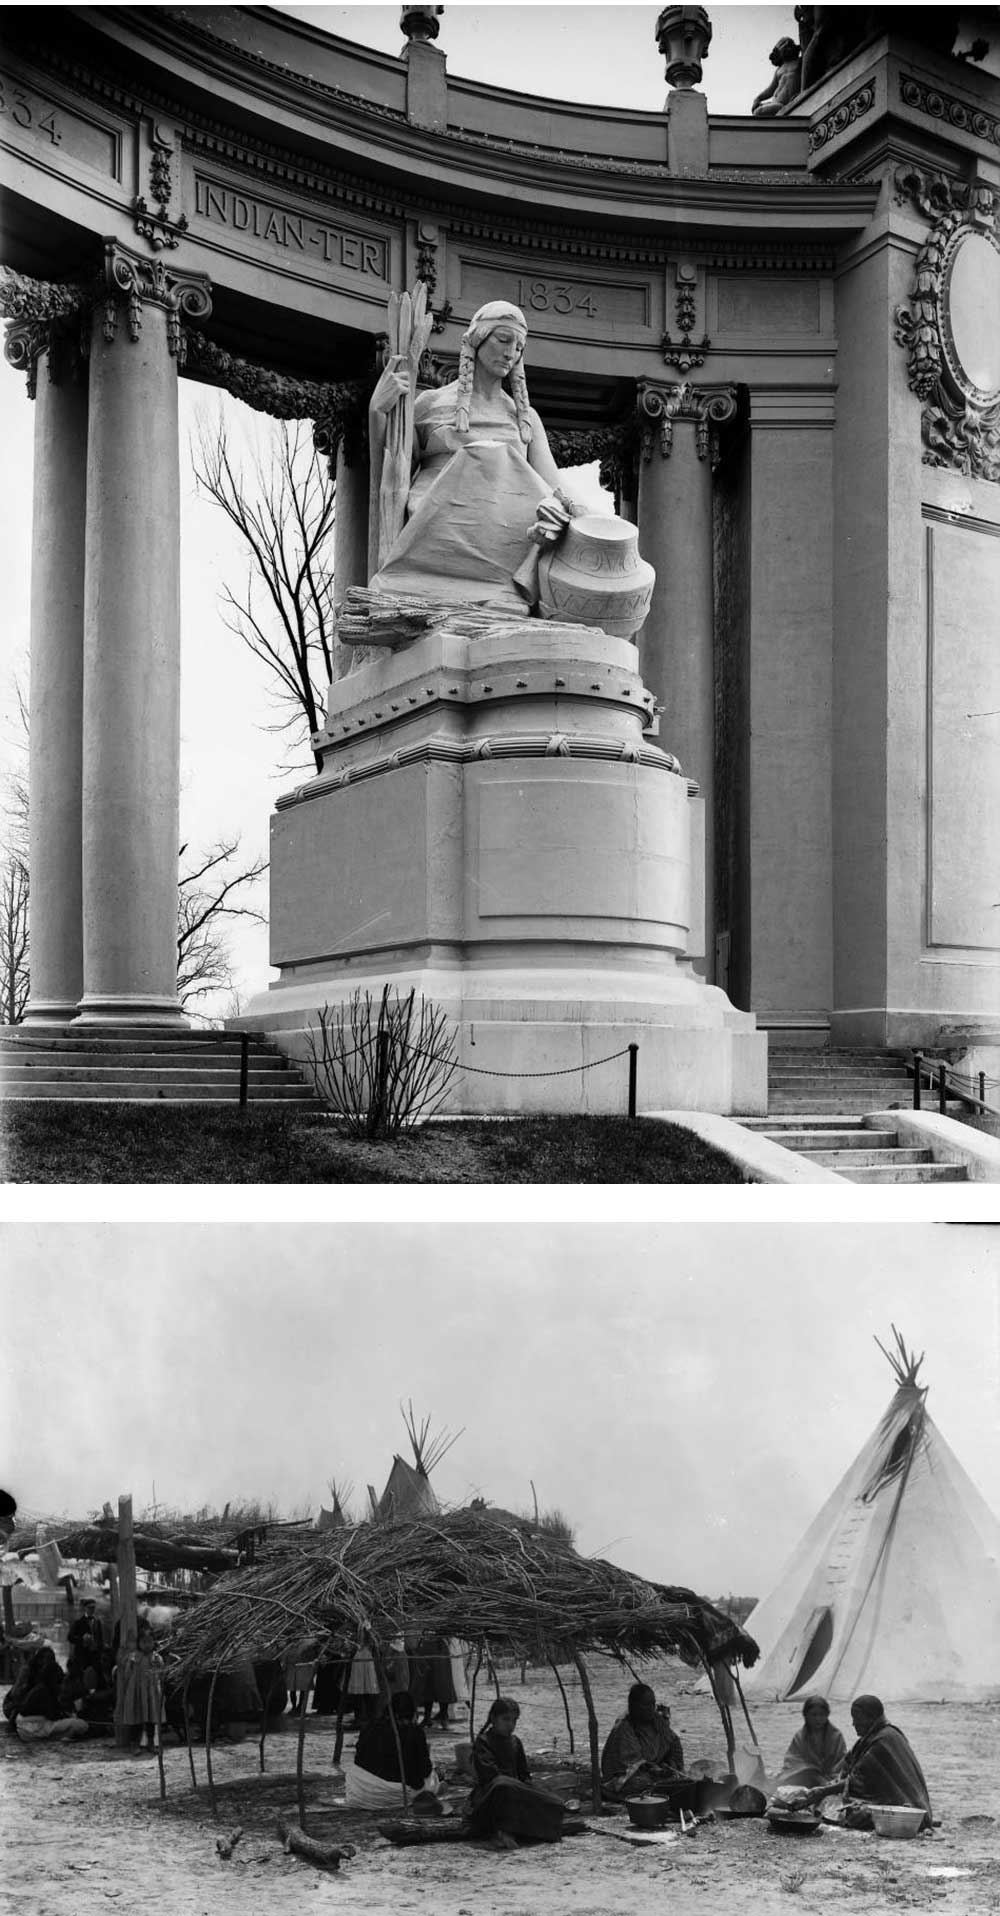 Top: Statue of Indian Territory in the Colonnade of States, 1904. Bottom: Apache Indian camp, 1904.